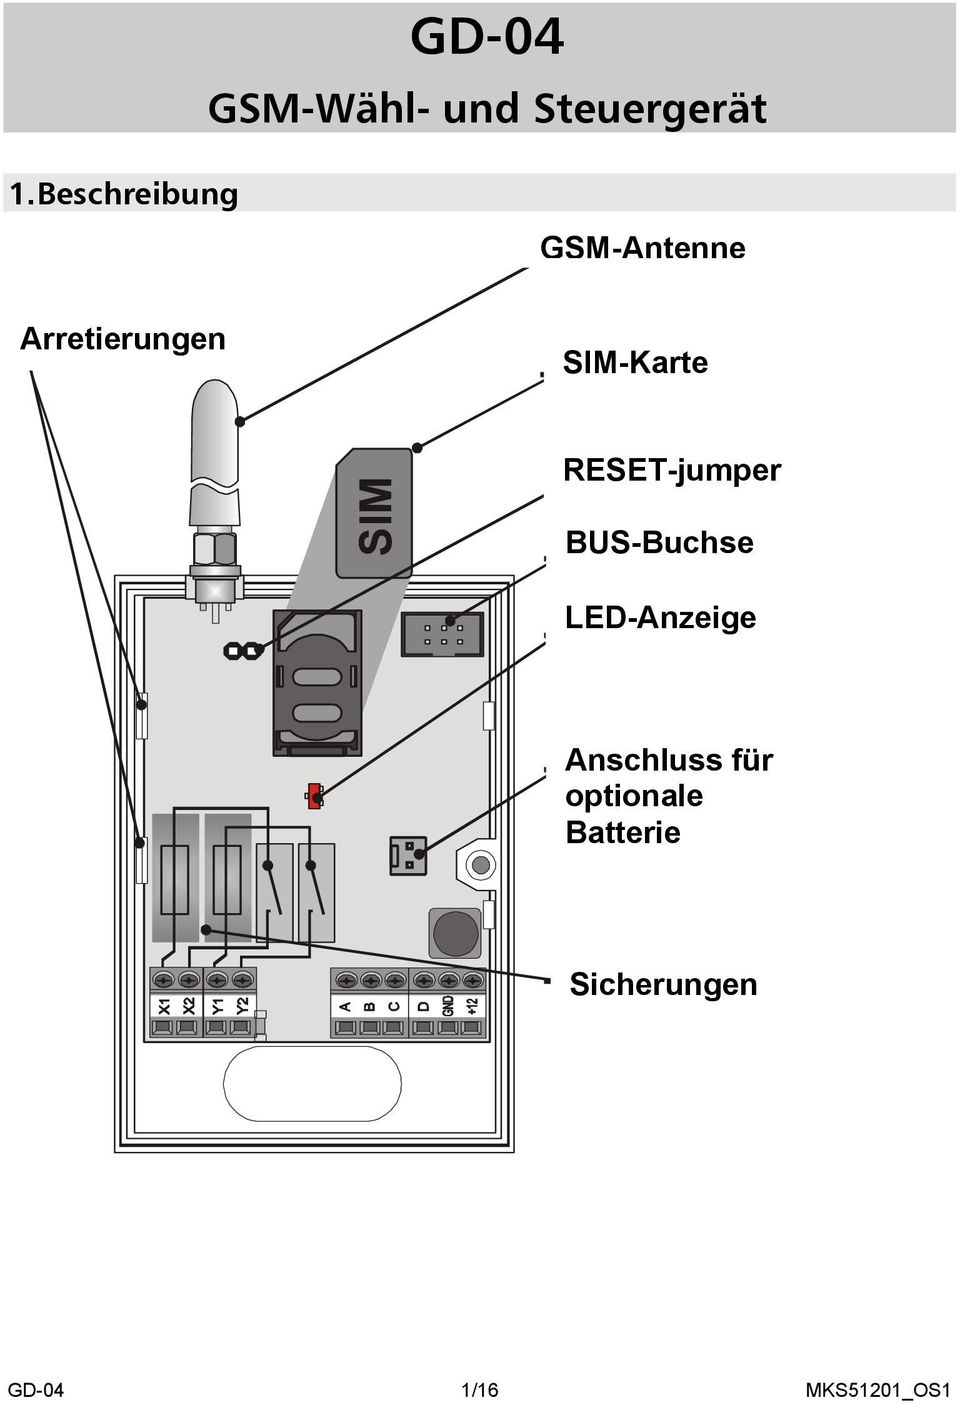 SIM RESET-jumper Bus BUS-Buchse connector LED-Anzeige indicator